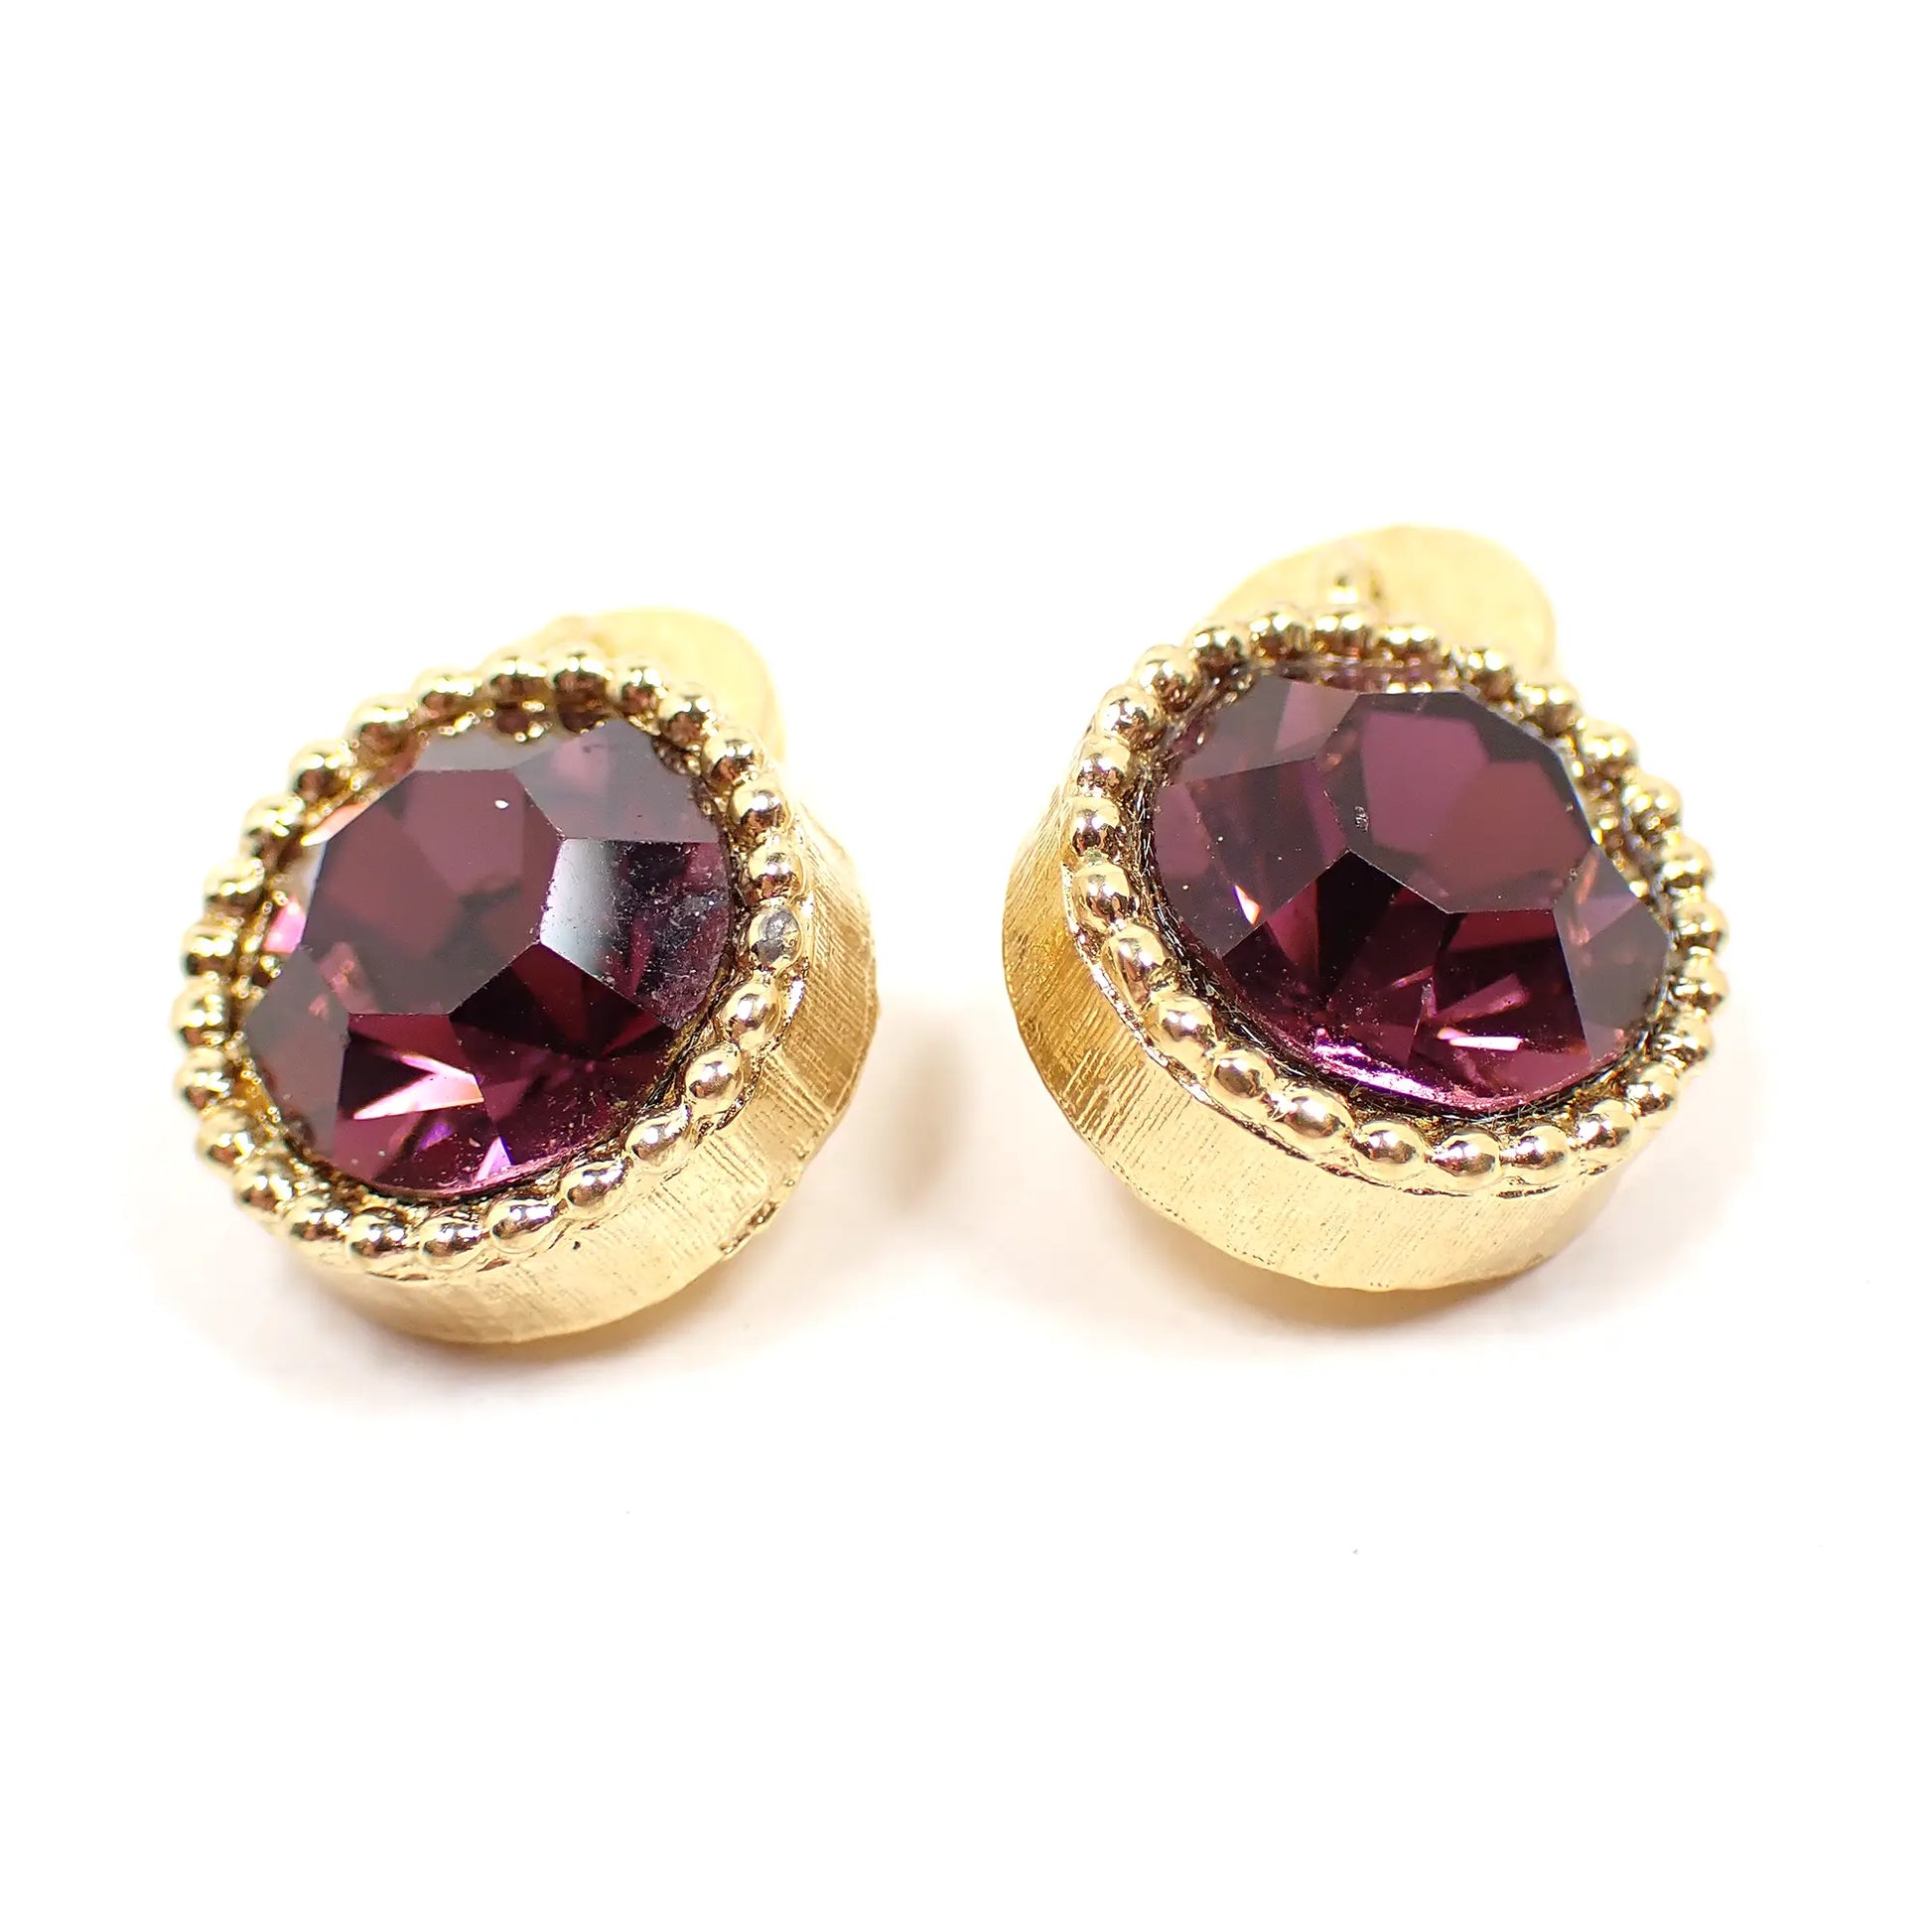 Angled view of the Mid Century vintage rhinestone bridge cufflinks. They are round in shape. The metal is gold tone in color and has a round dot pattern around the front edge. There are dark purple rhinestones in the middle.